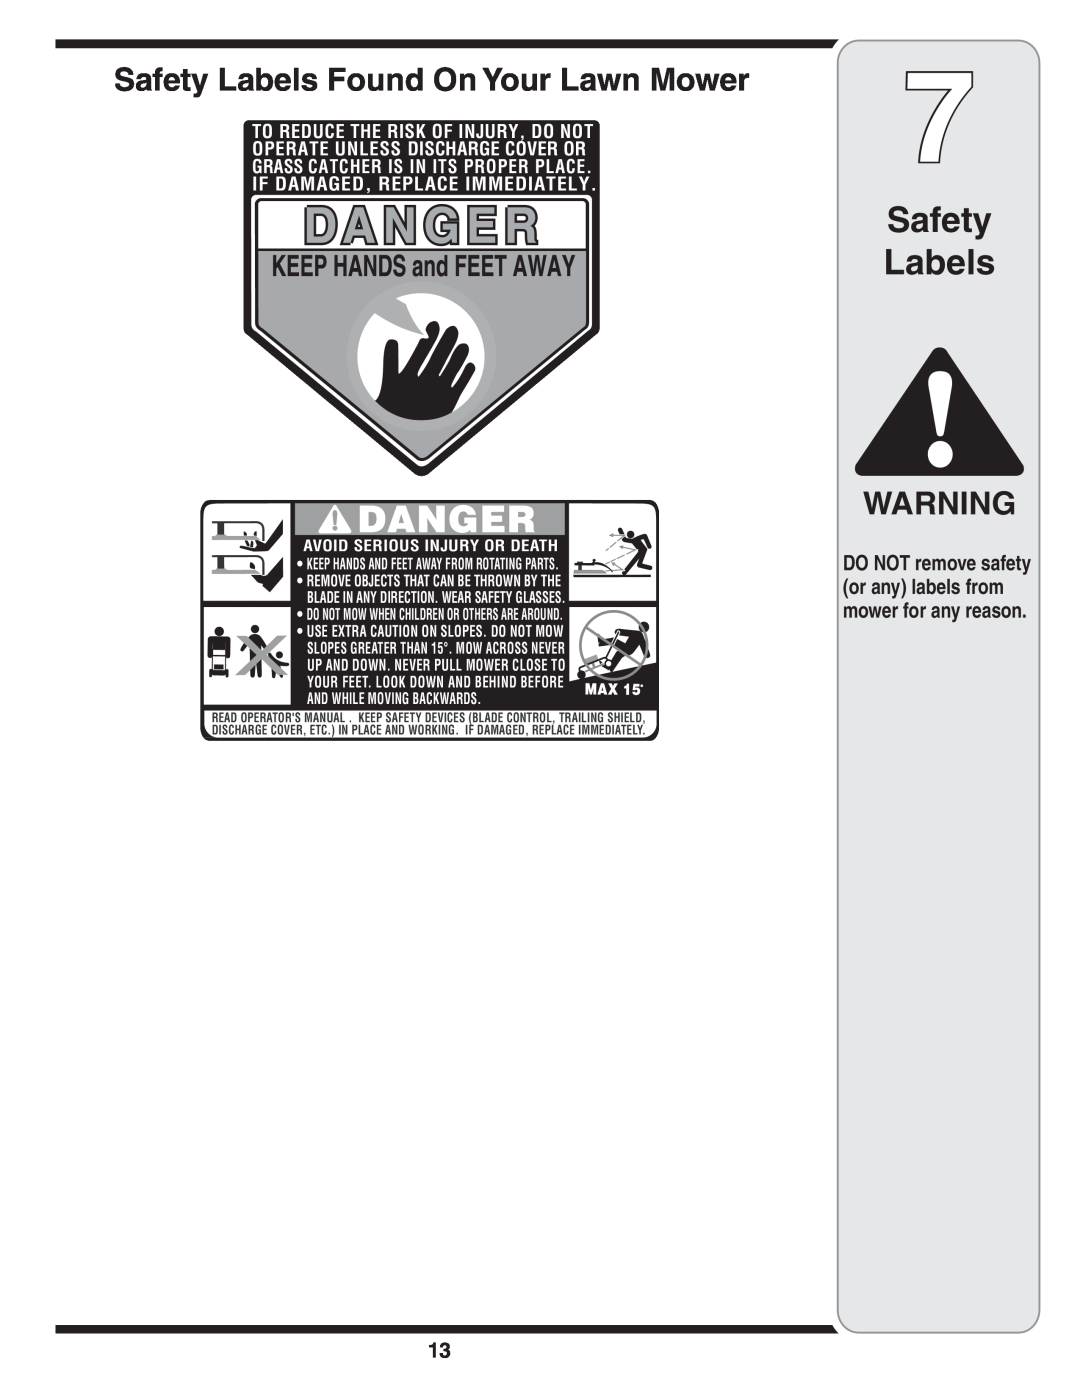 Yard-Man 263 Safety Labels Found On Your Lawn Mower, DO NOT remove safety or any labels from mower for any reason 